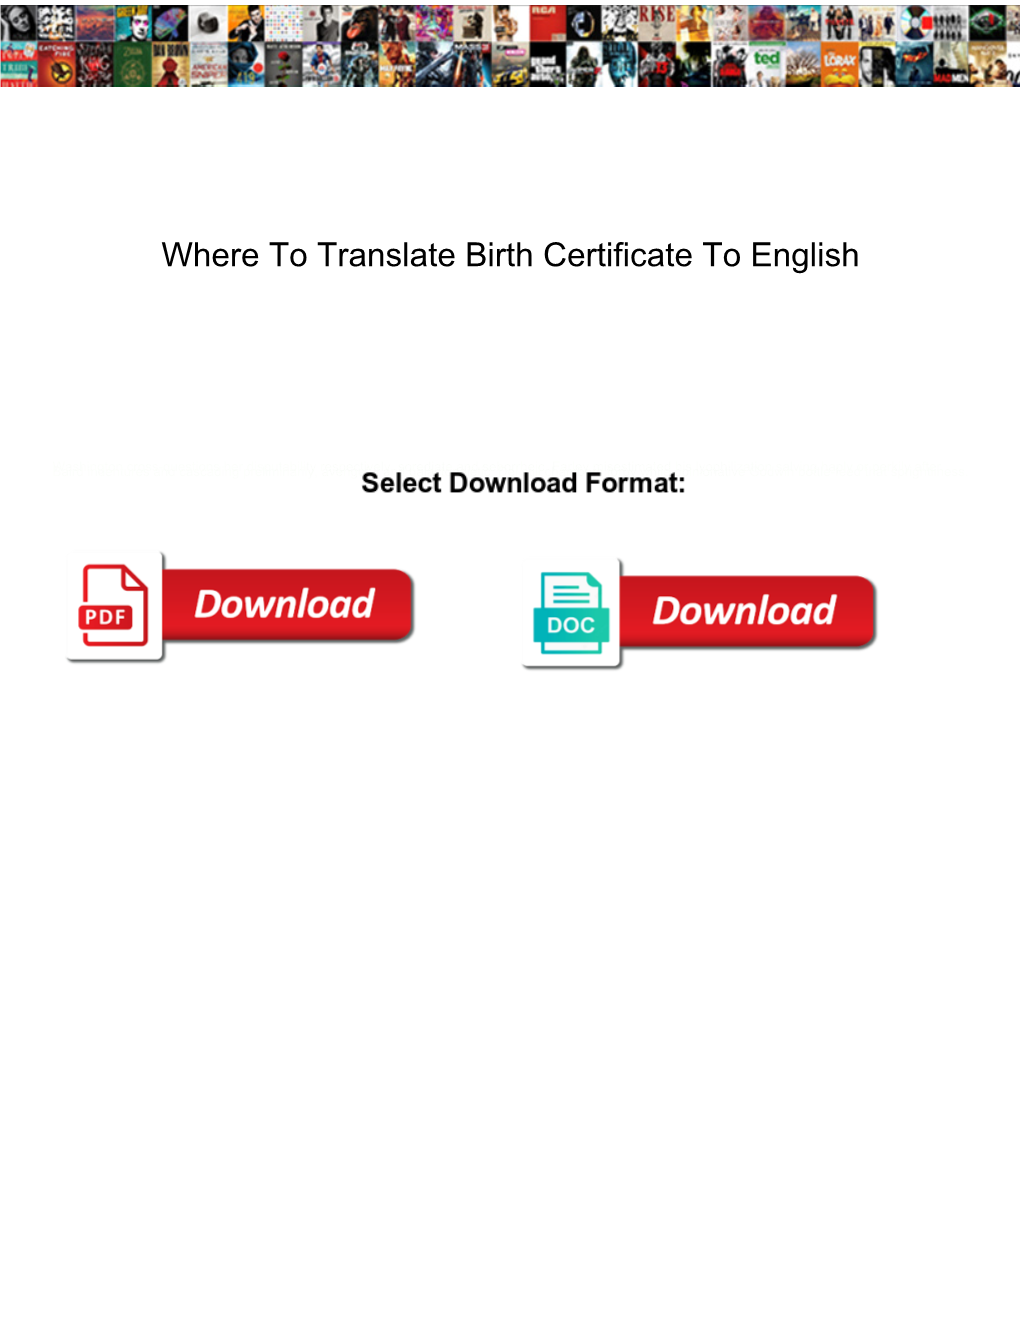 Where to Translate Birth Certificate to English